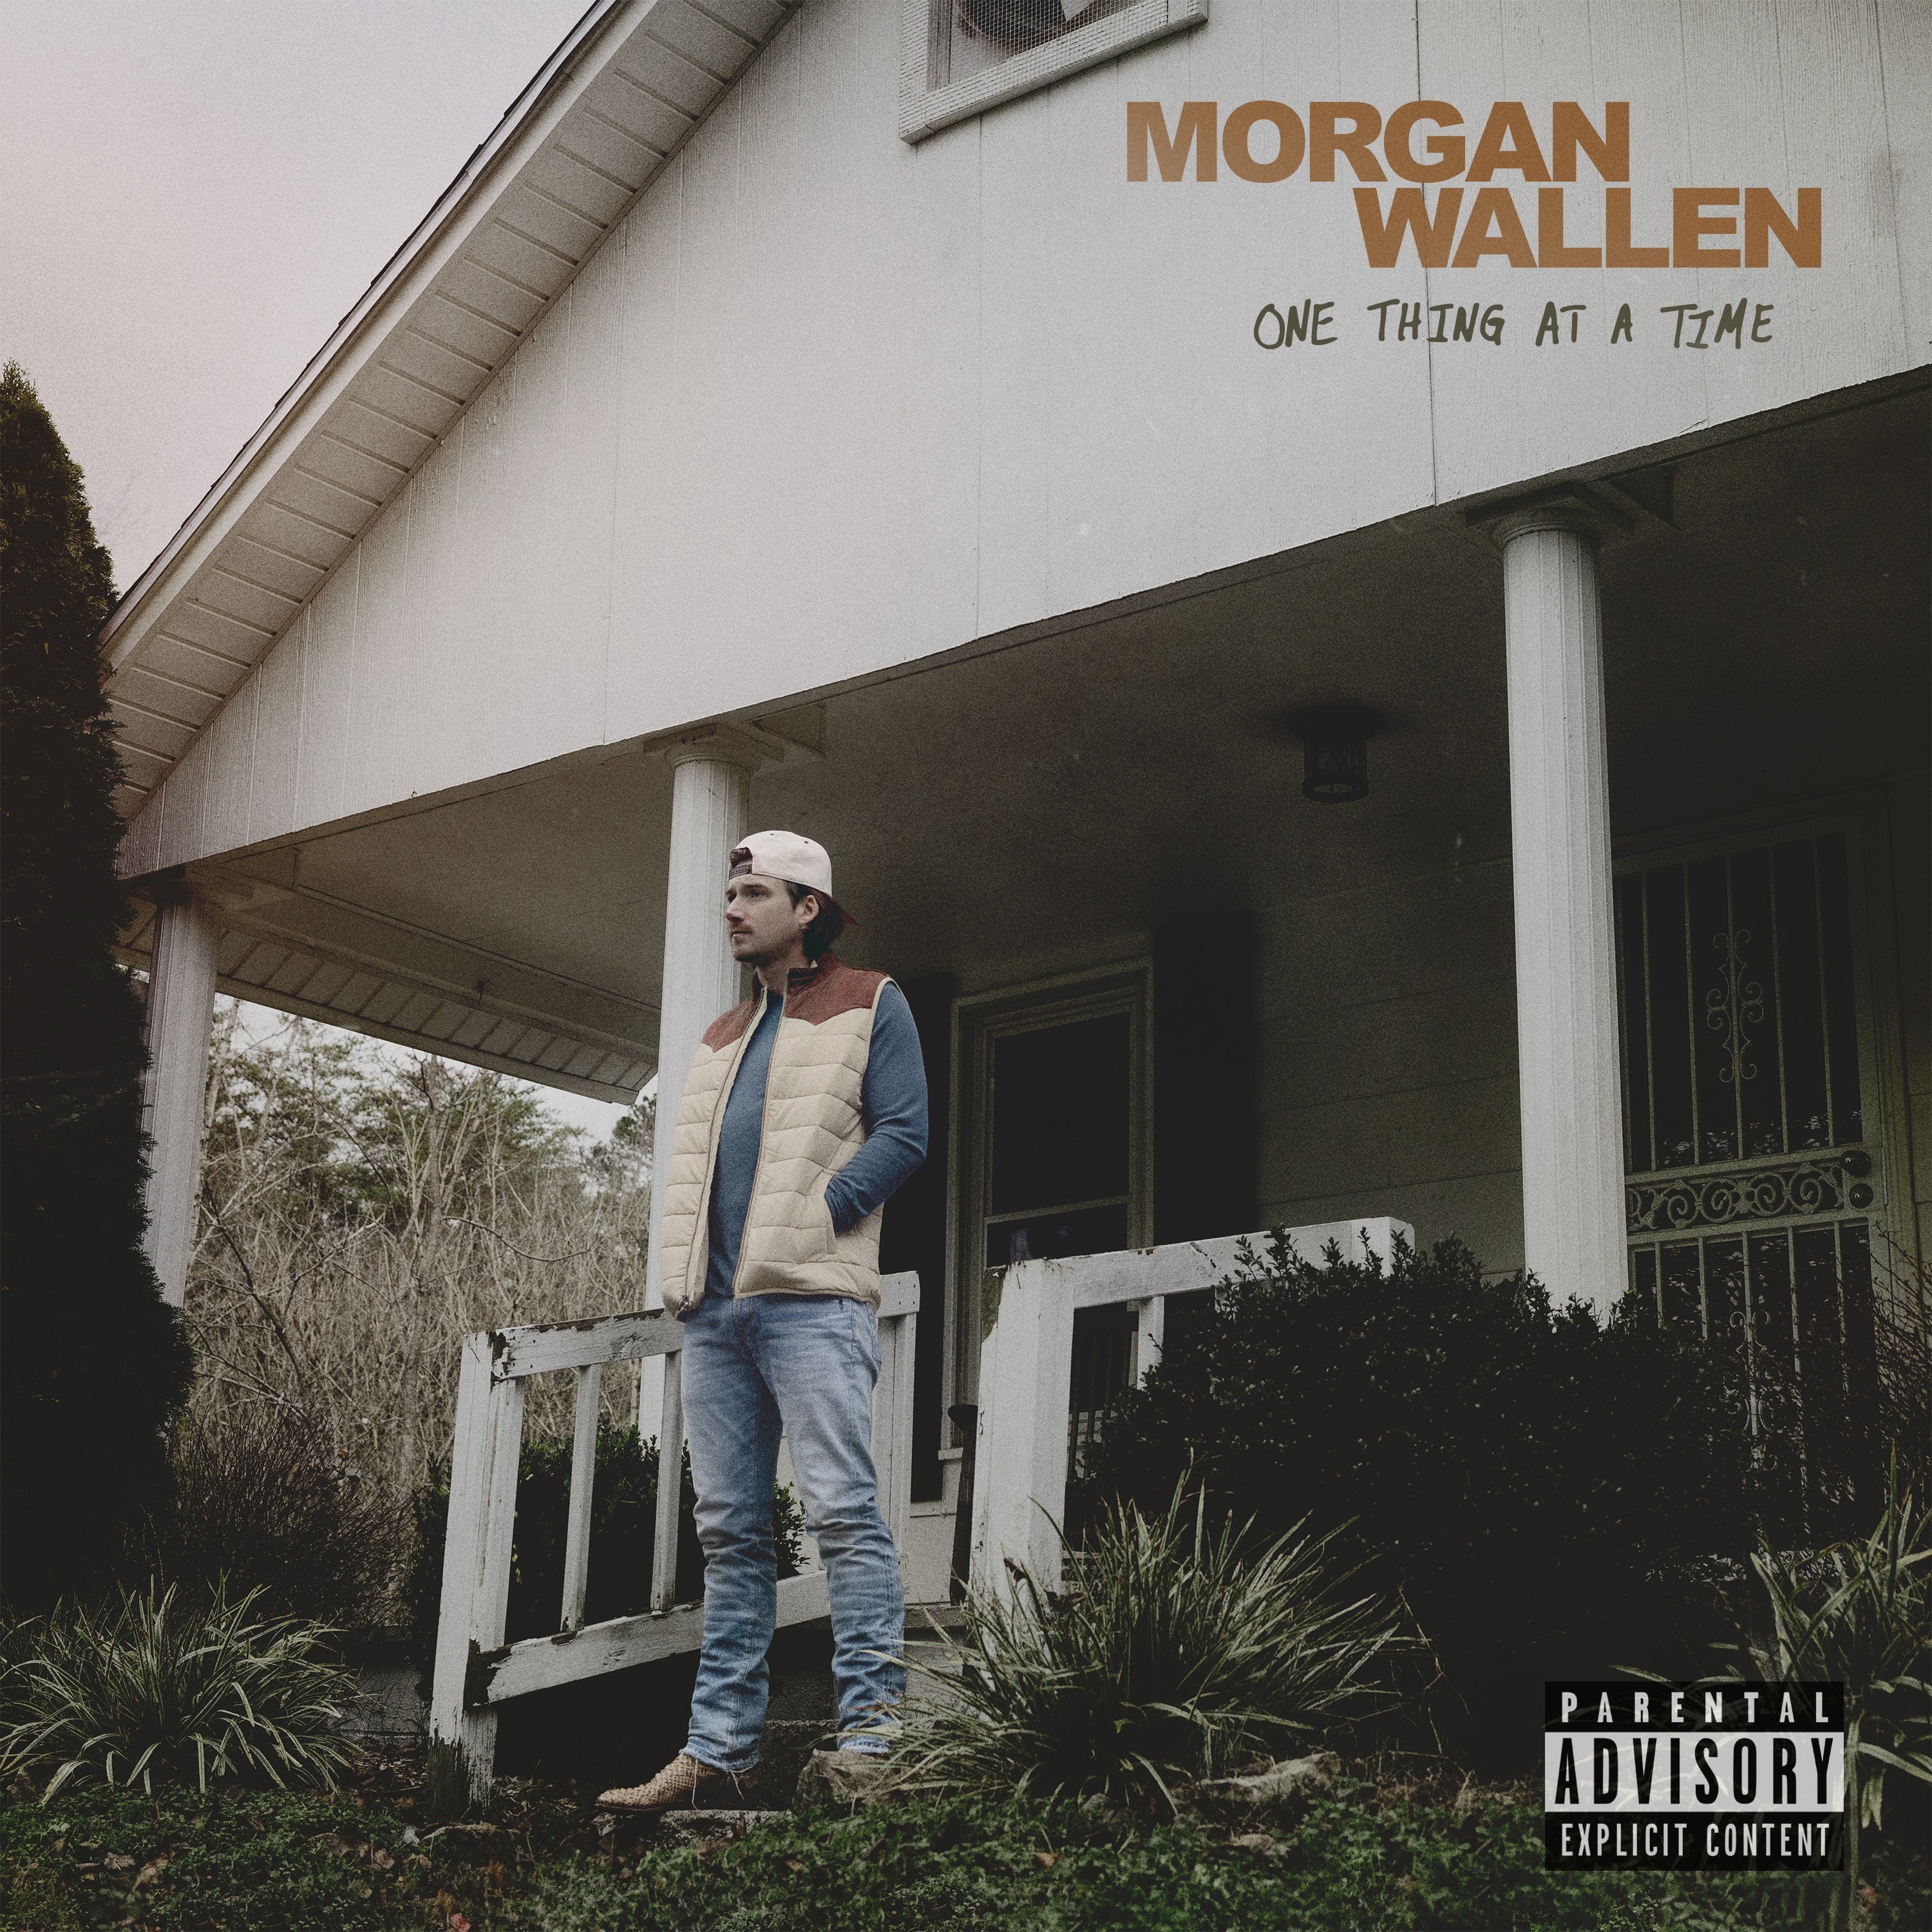 Morgan Wallen One Thing At A Time [2 CD]